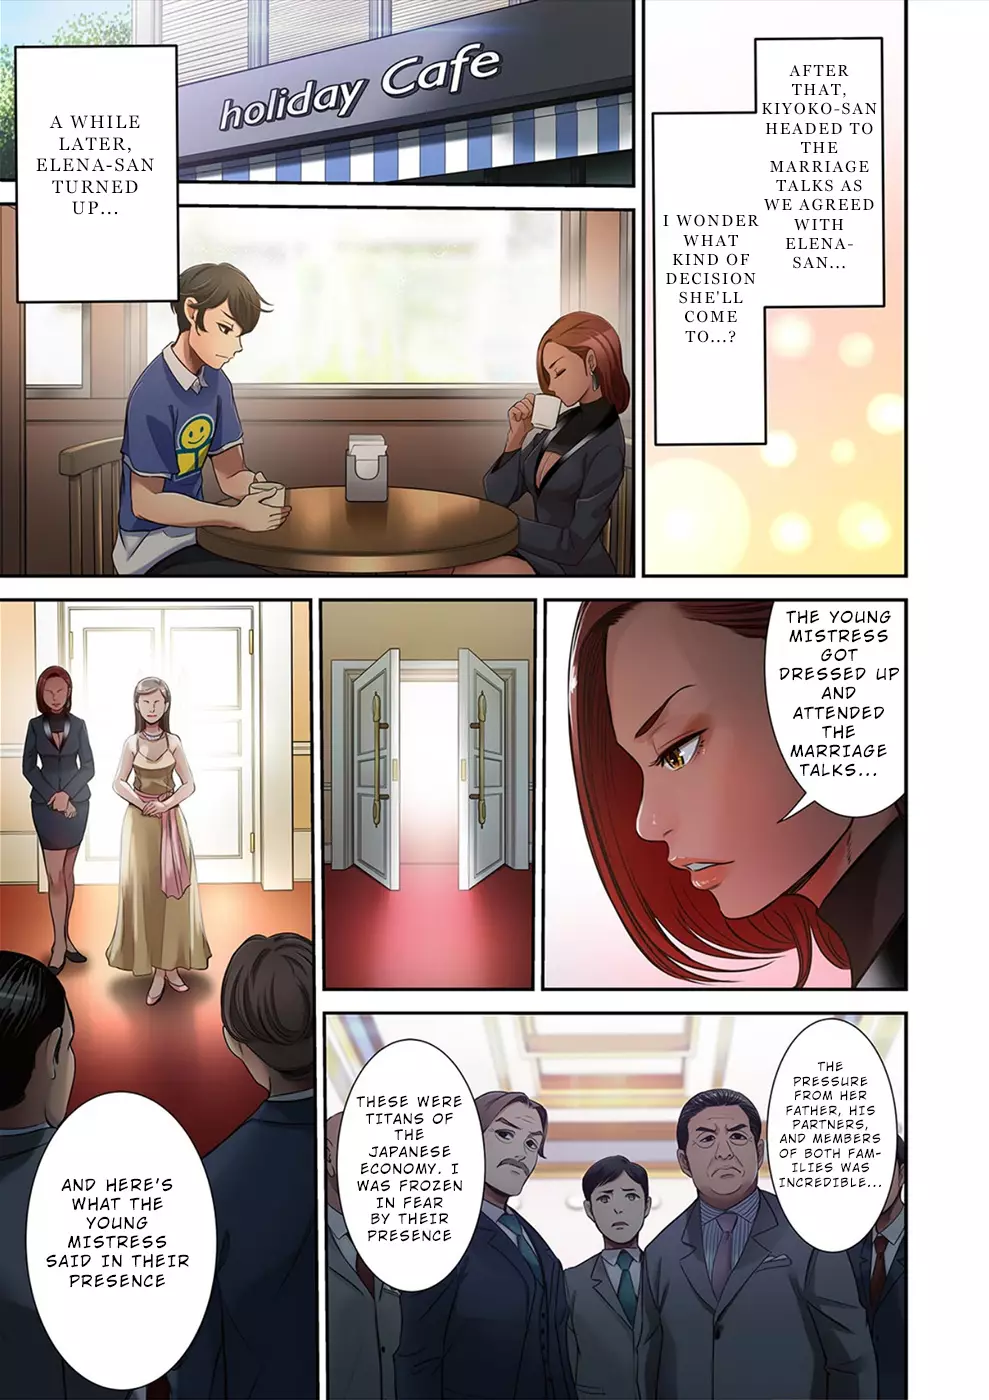 100% Possibility Of Meeting Girls - 19 page 6-f06fe325